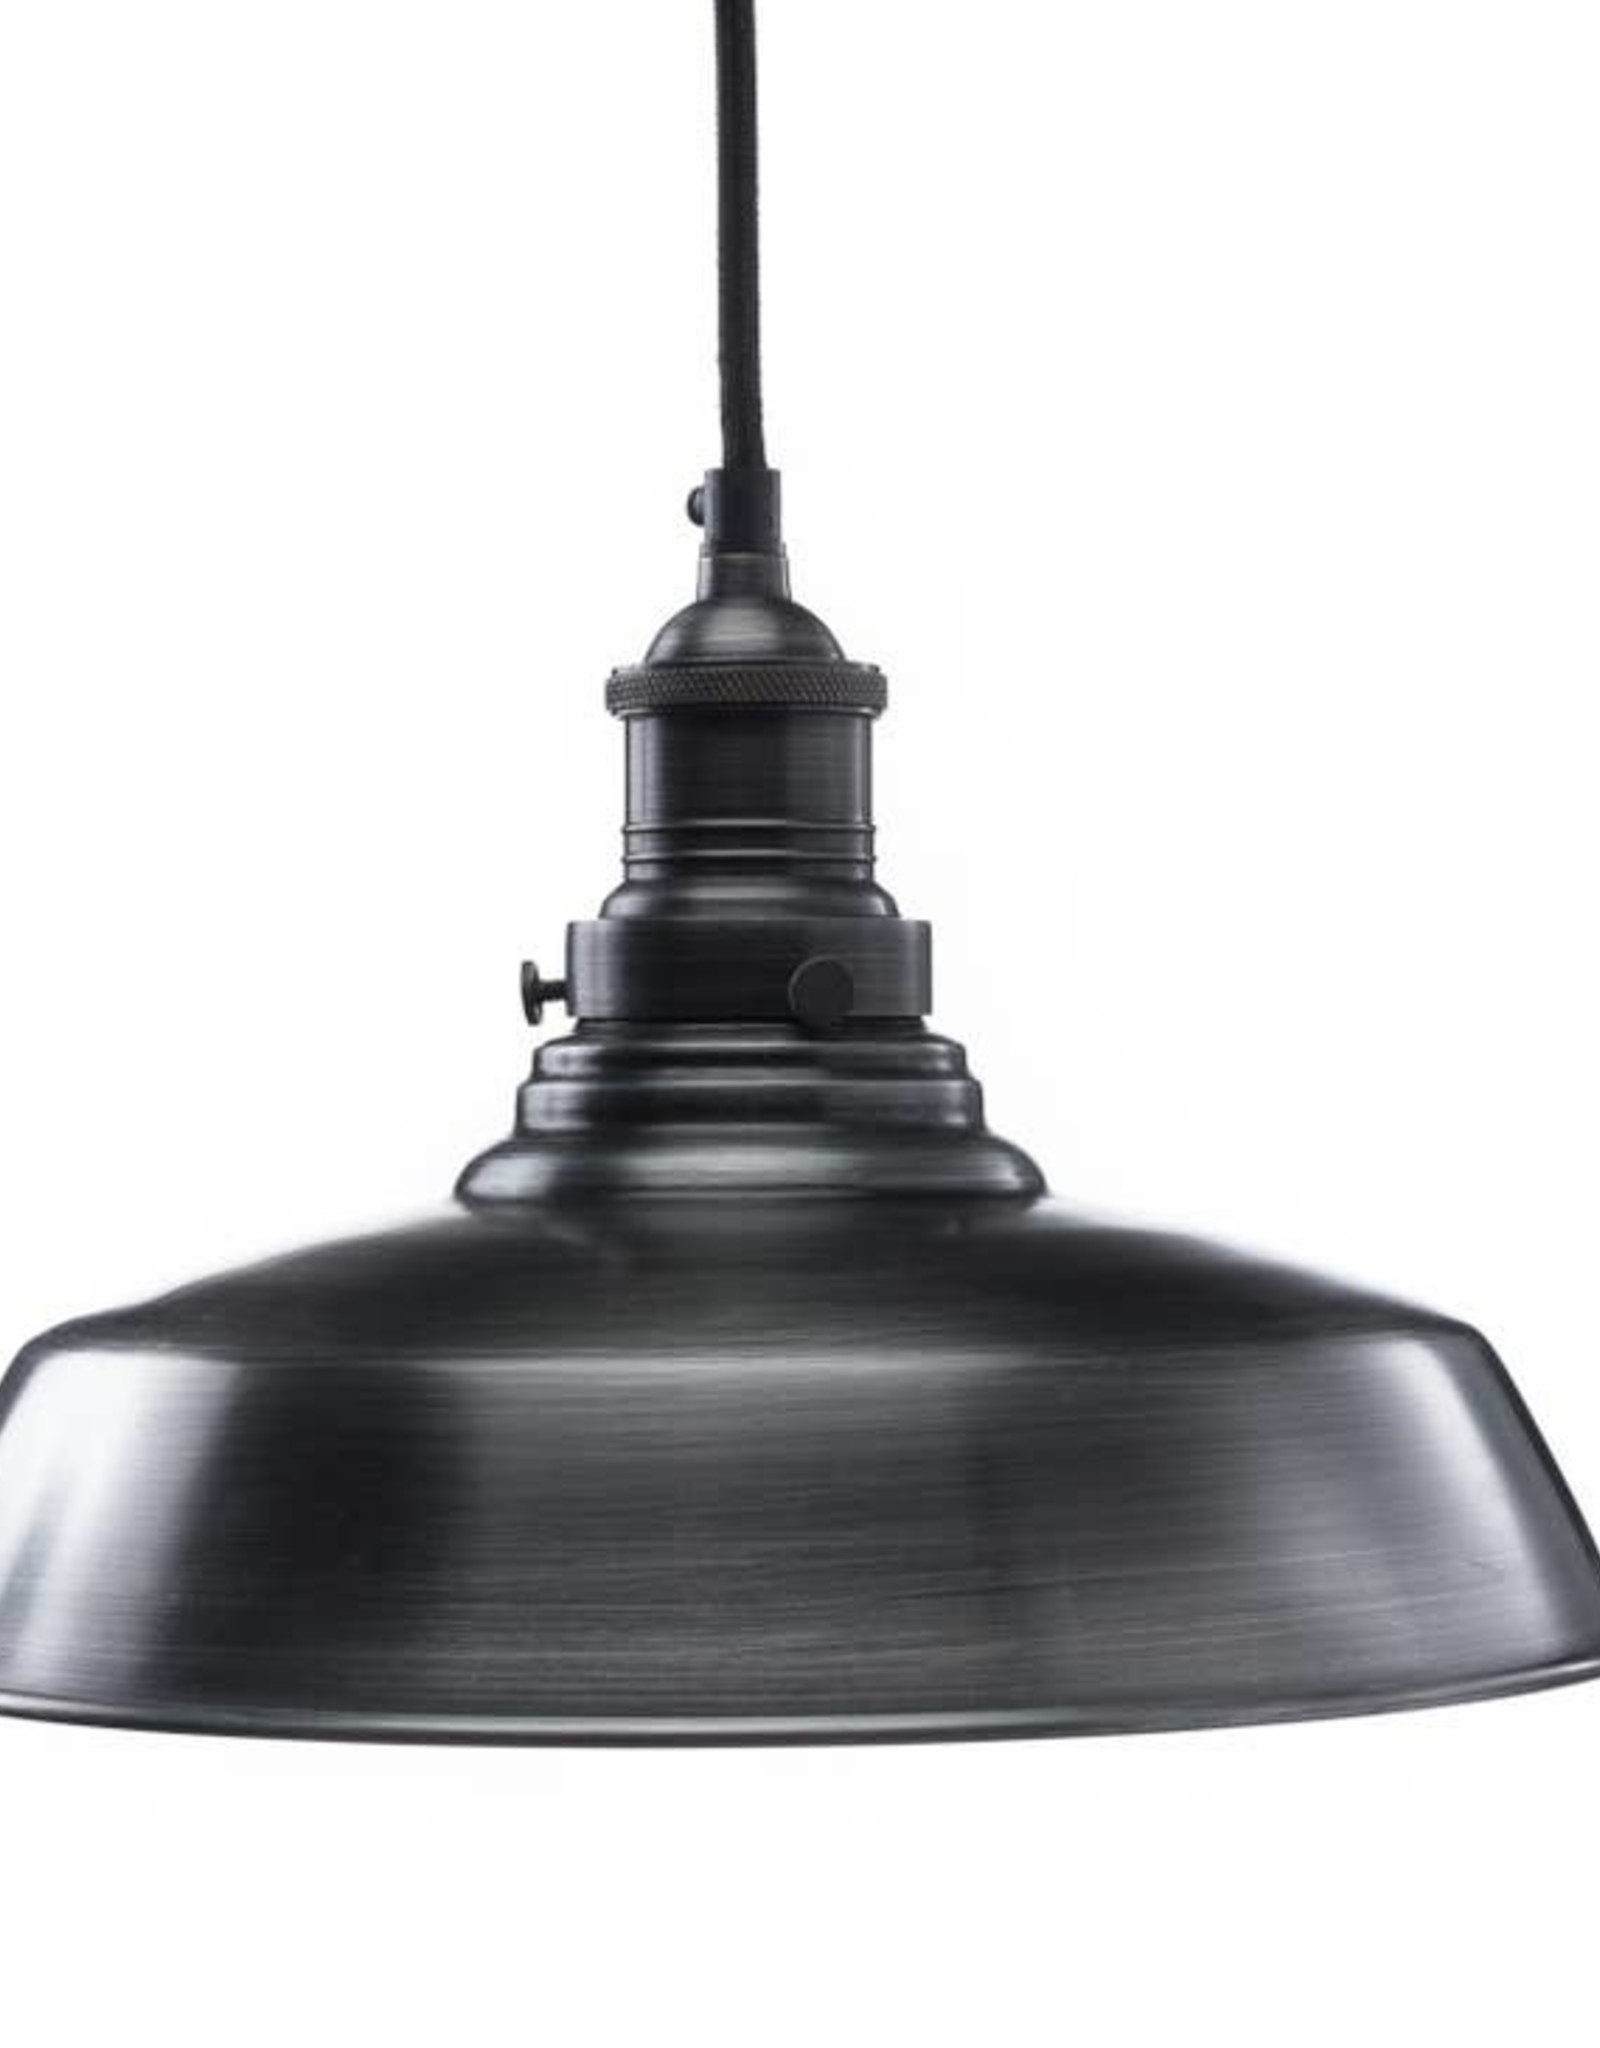 Blackhouse Classic Dome Shade Steel